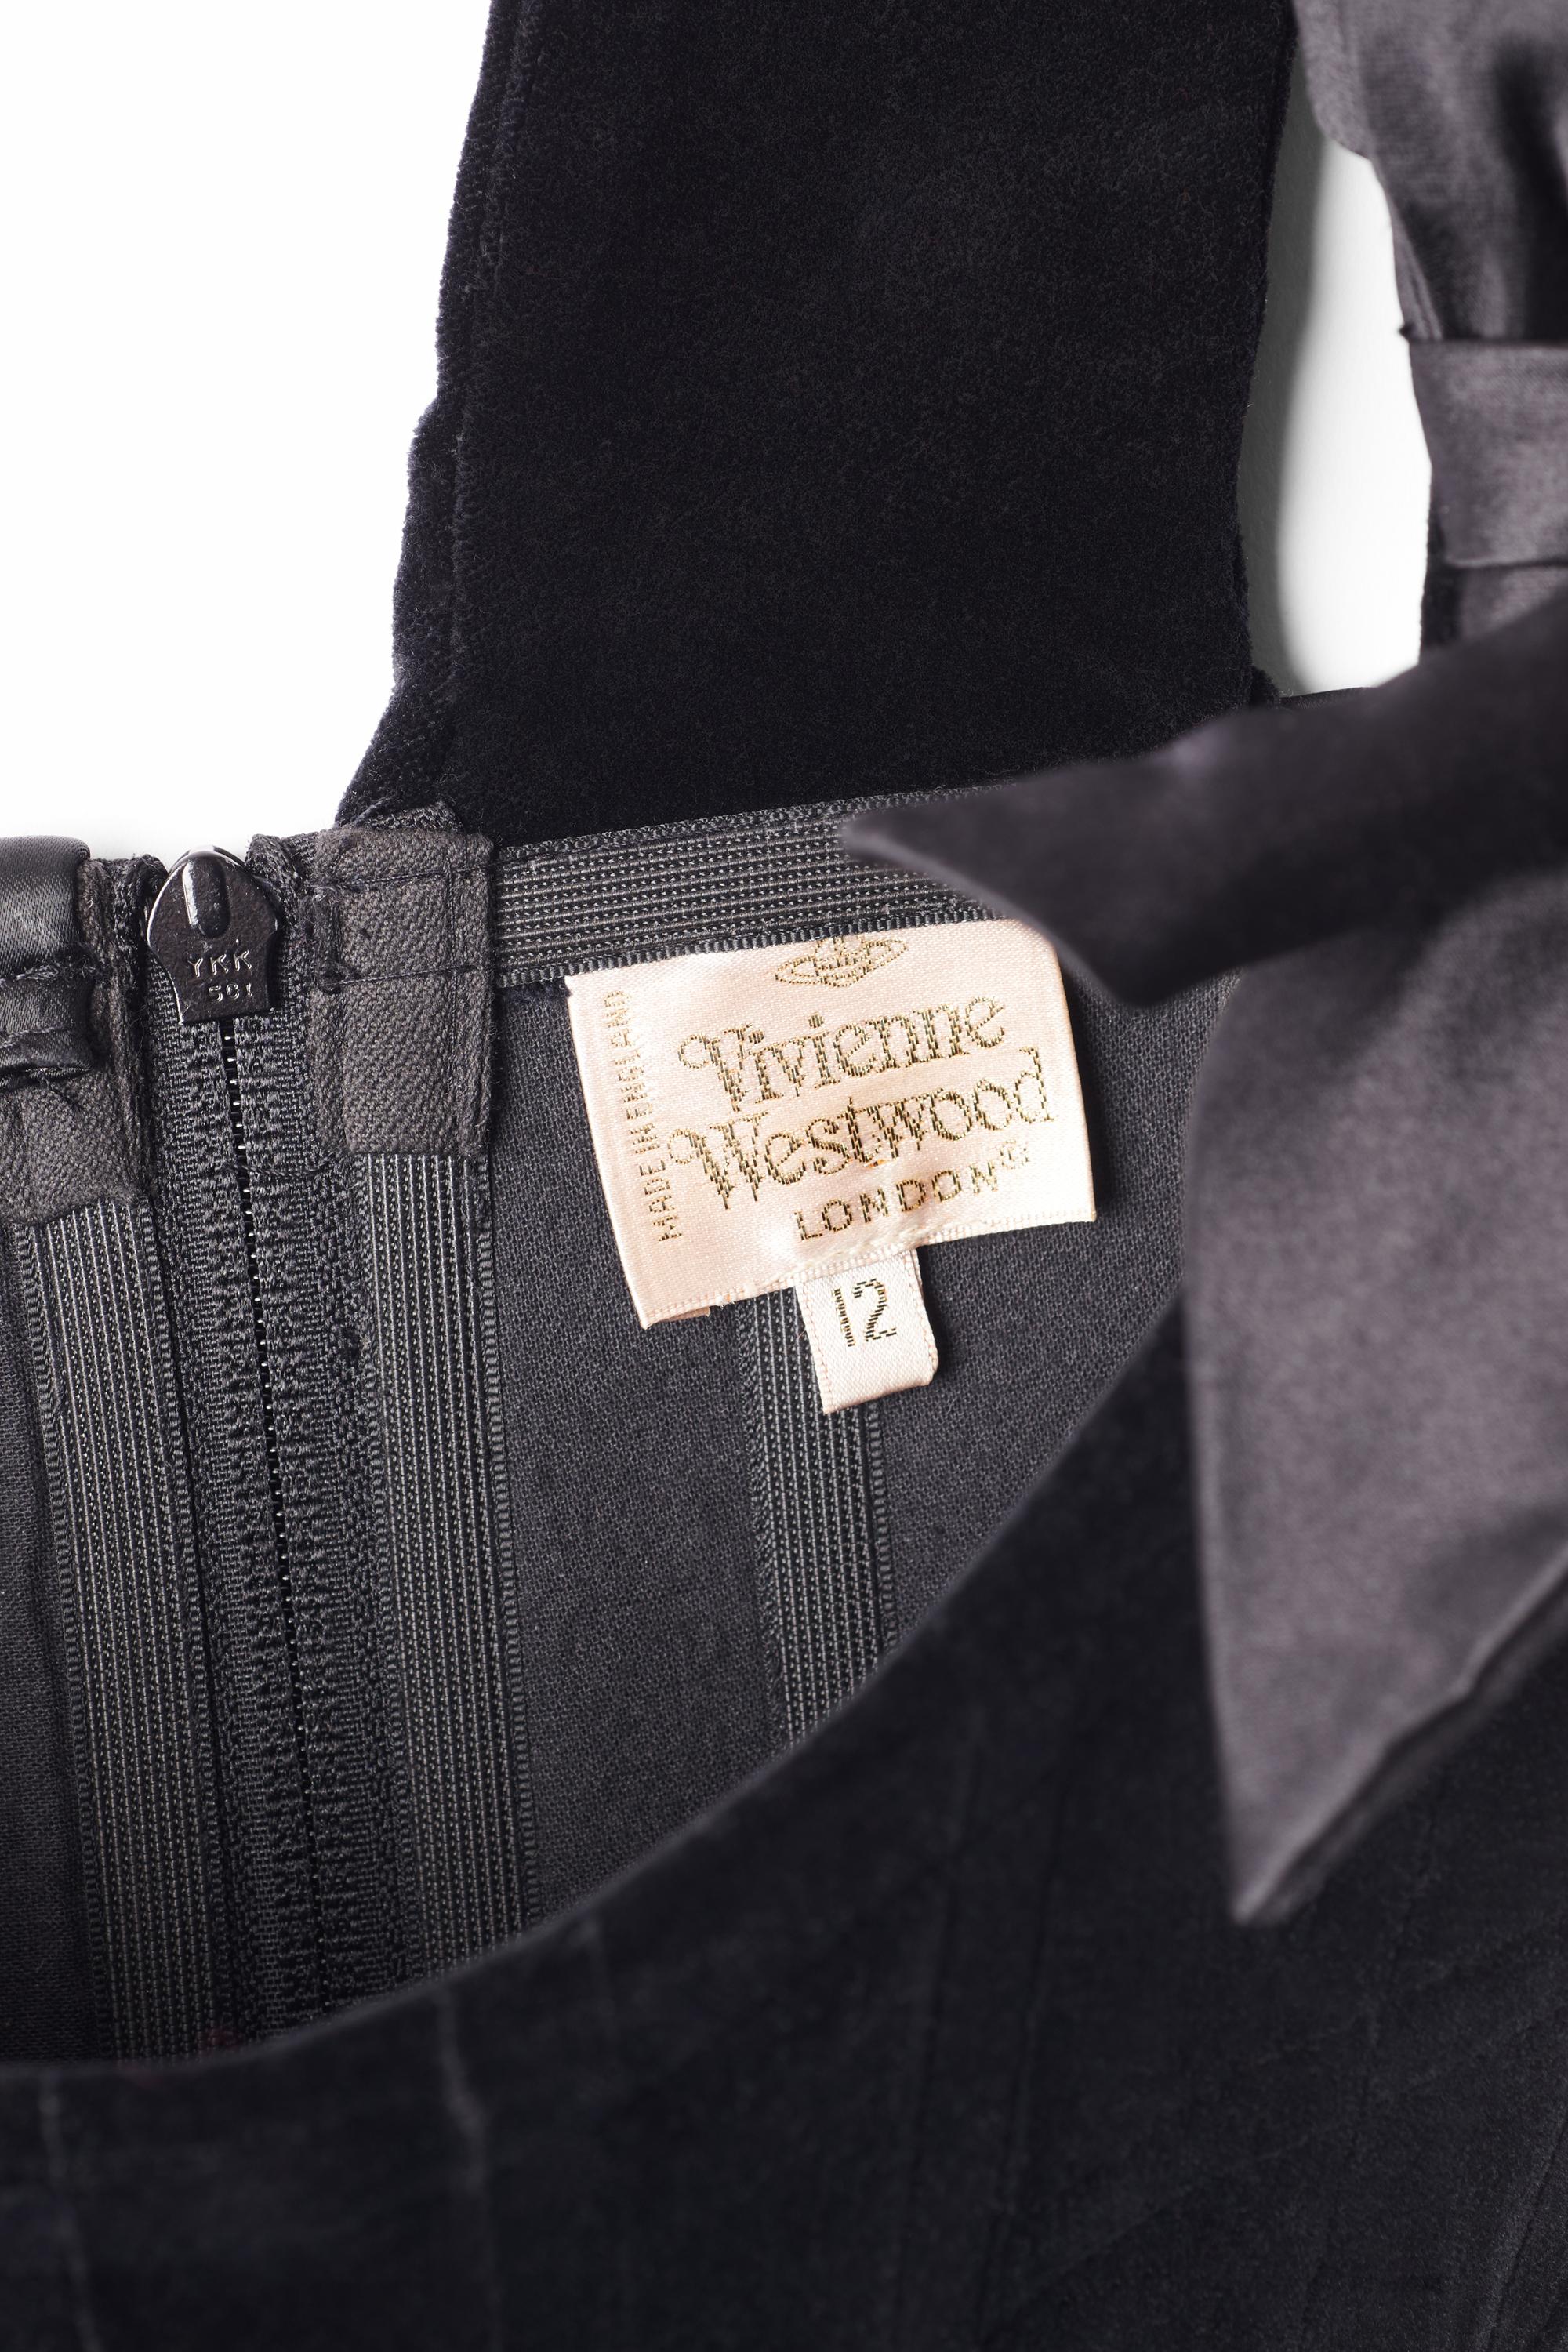 Vintage Vivienne Westwood 1993 black velvet corset. Features boned corset body in the iconic Westwood shape, one shoulder silhouette with bow detailing and zip back closure. In excellent vintage condition. 
Authenticity Guaranteed.

Modern Size: UK: